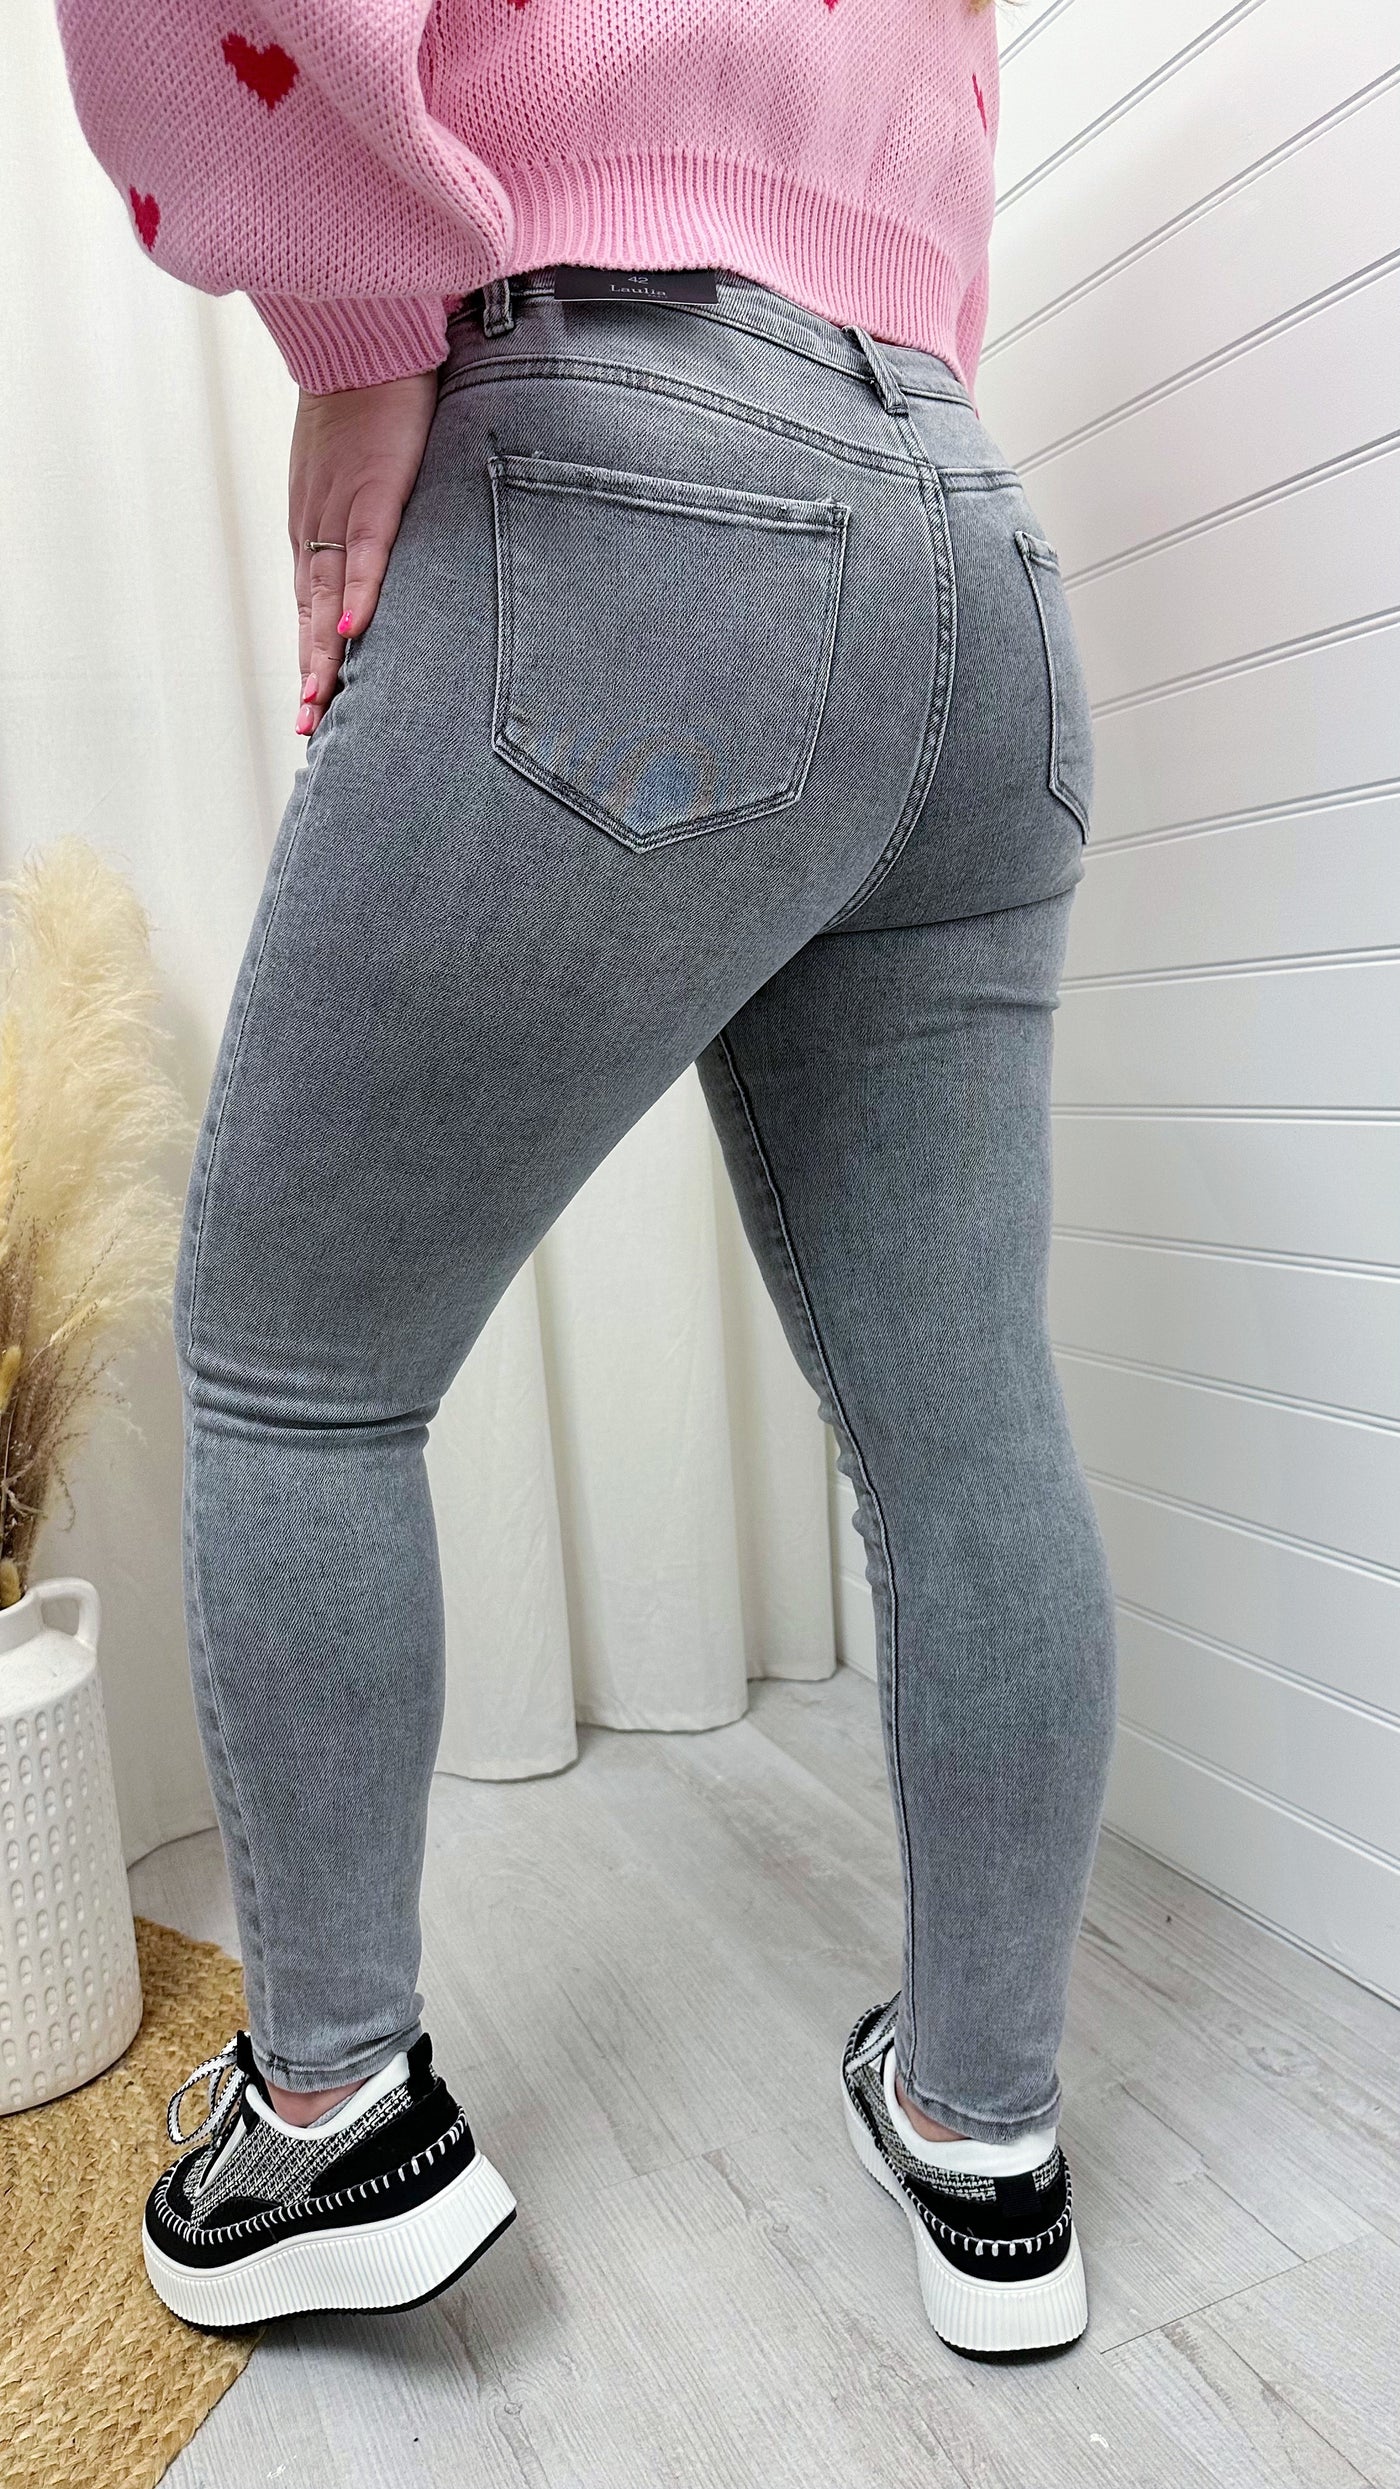 PLUS High Waisted Stretchy Skinny Jeans - GREY